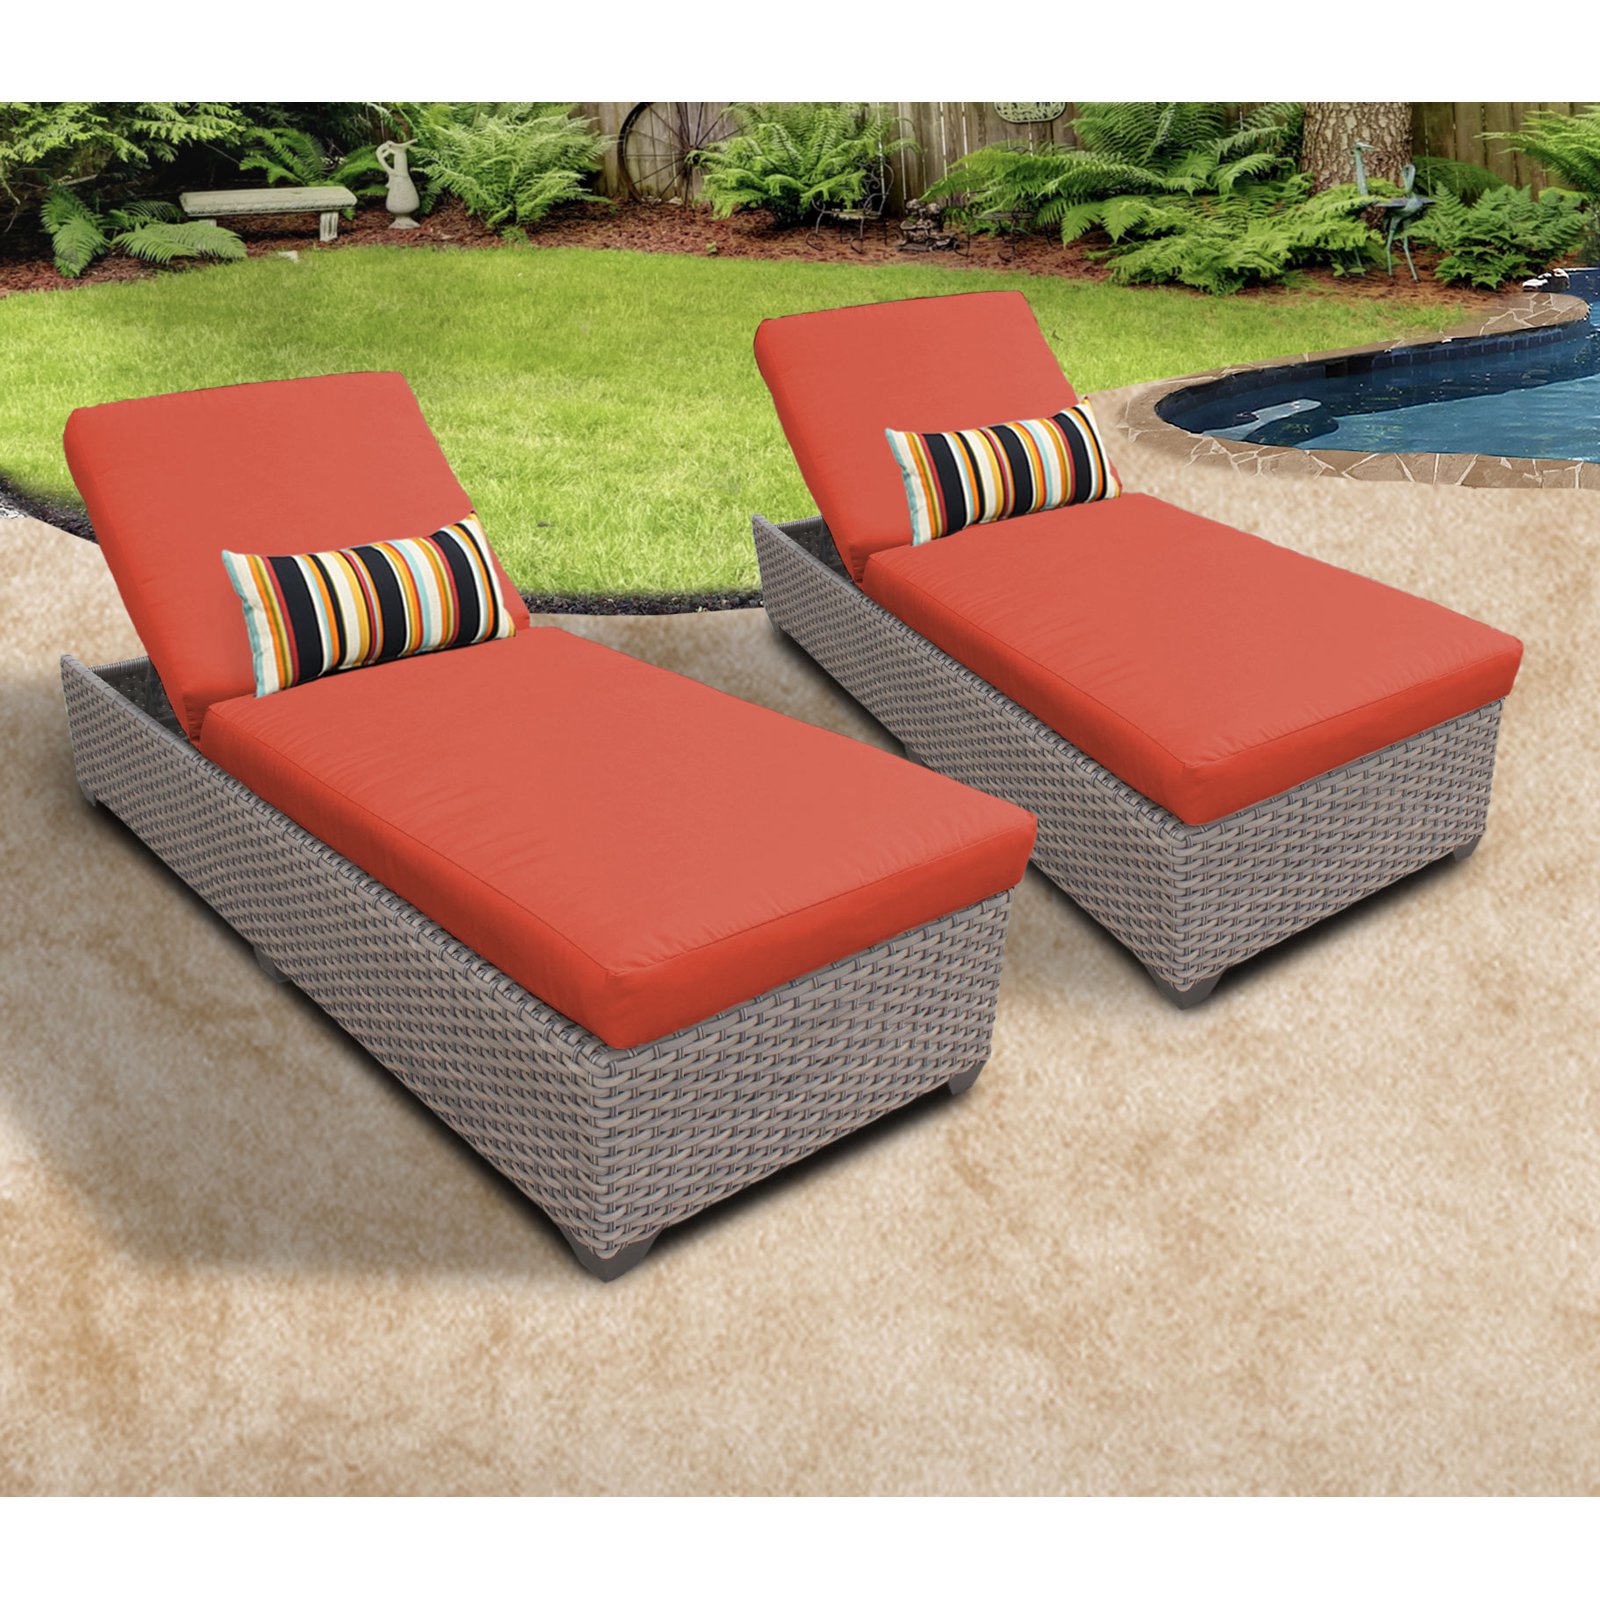 Monterey Patio Furniture Wicker Chaise Lounge - image 3 of 7